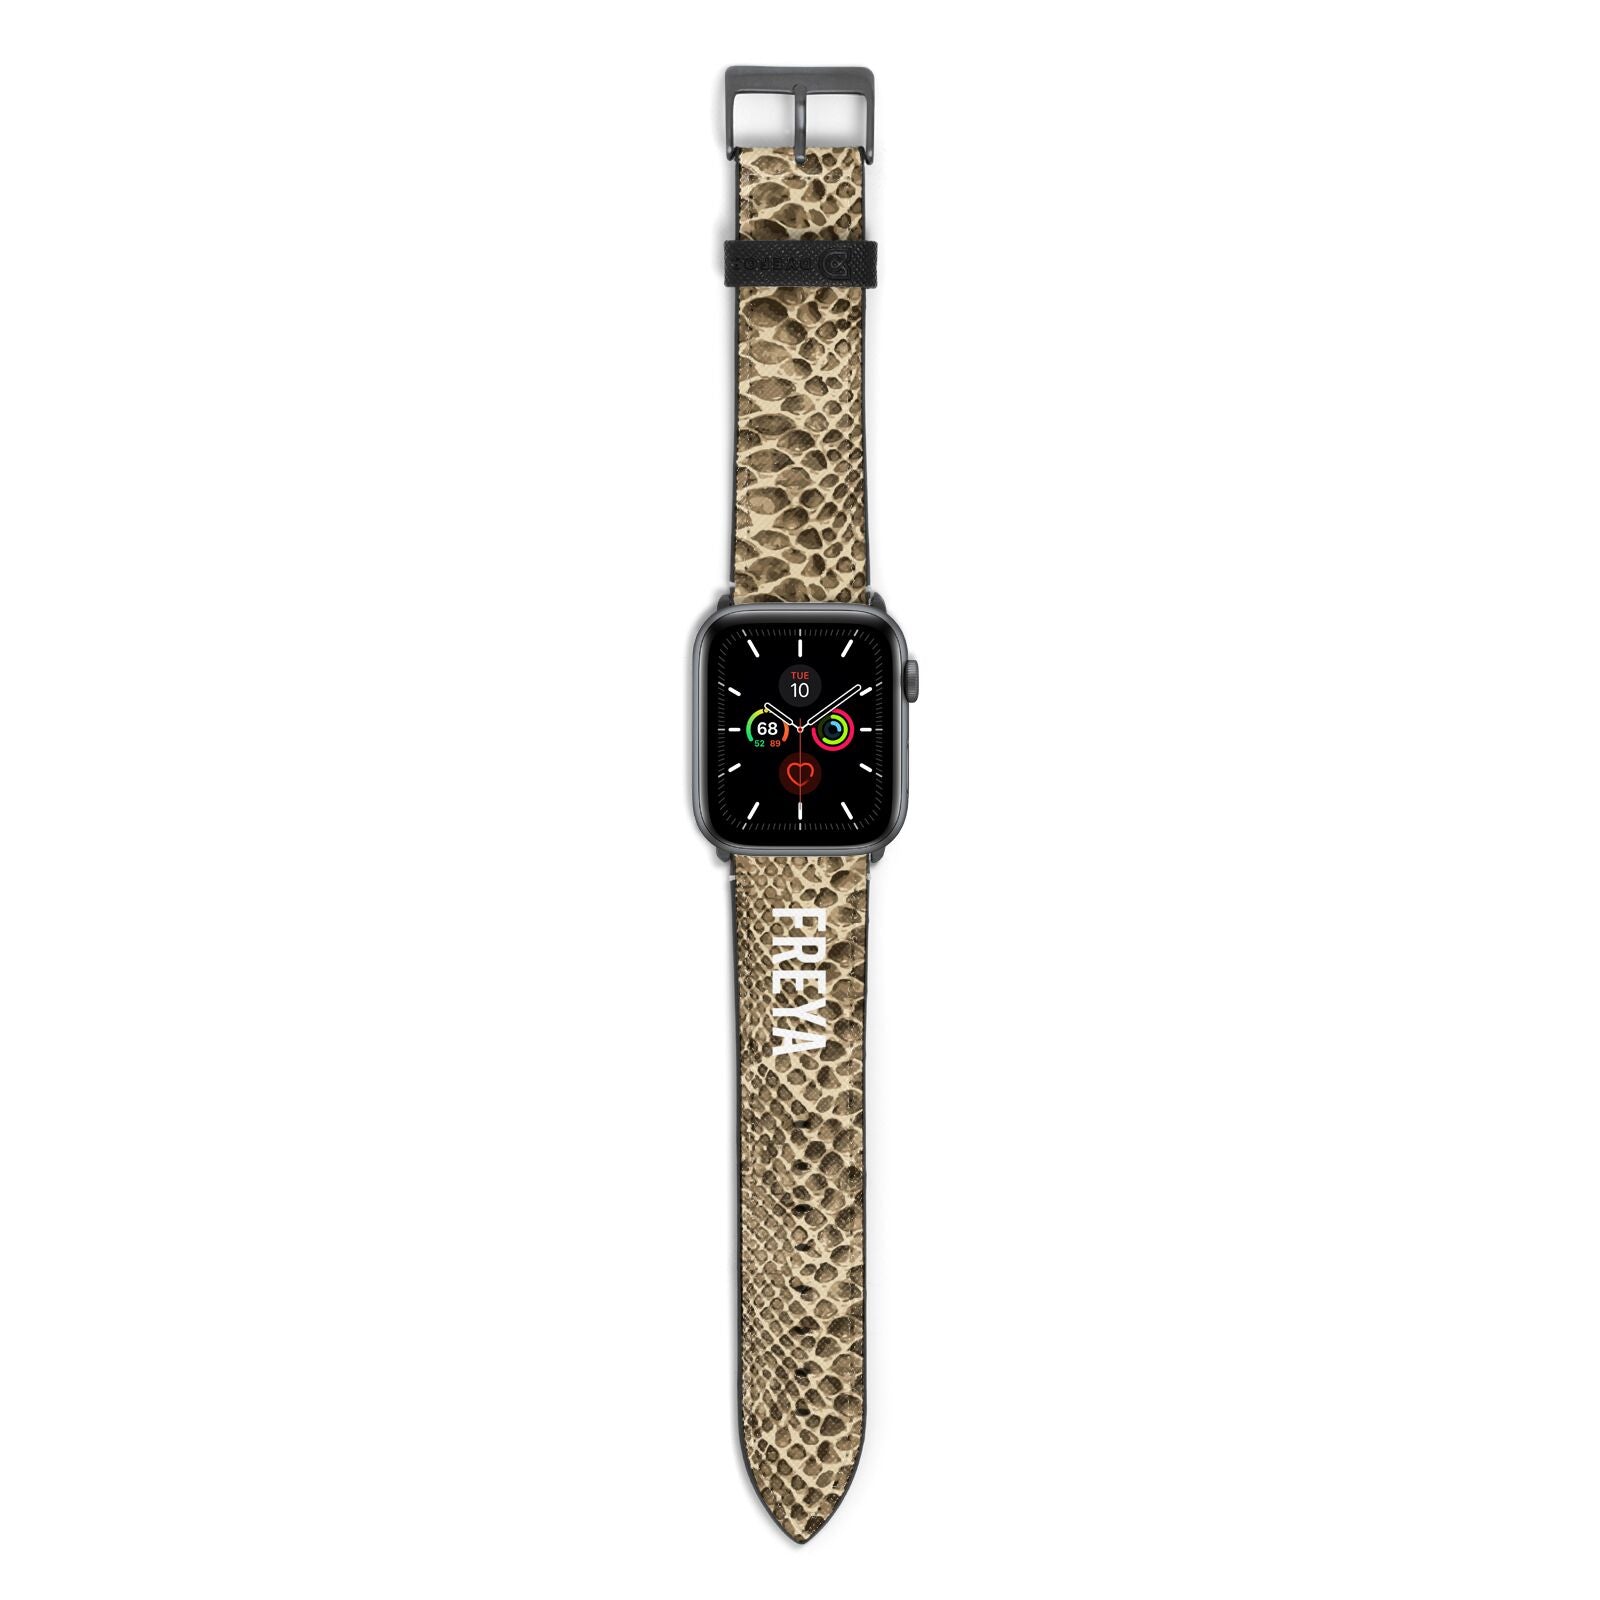 Personalised Tan Snakeskin Apple Watch Strap with Space Grey Hardware